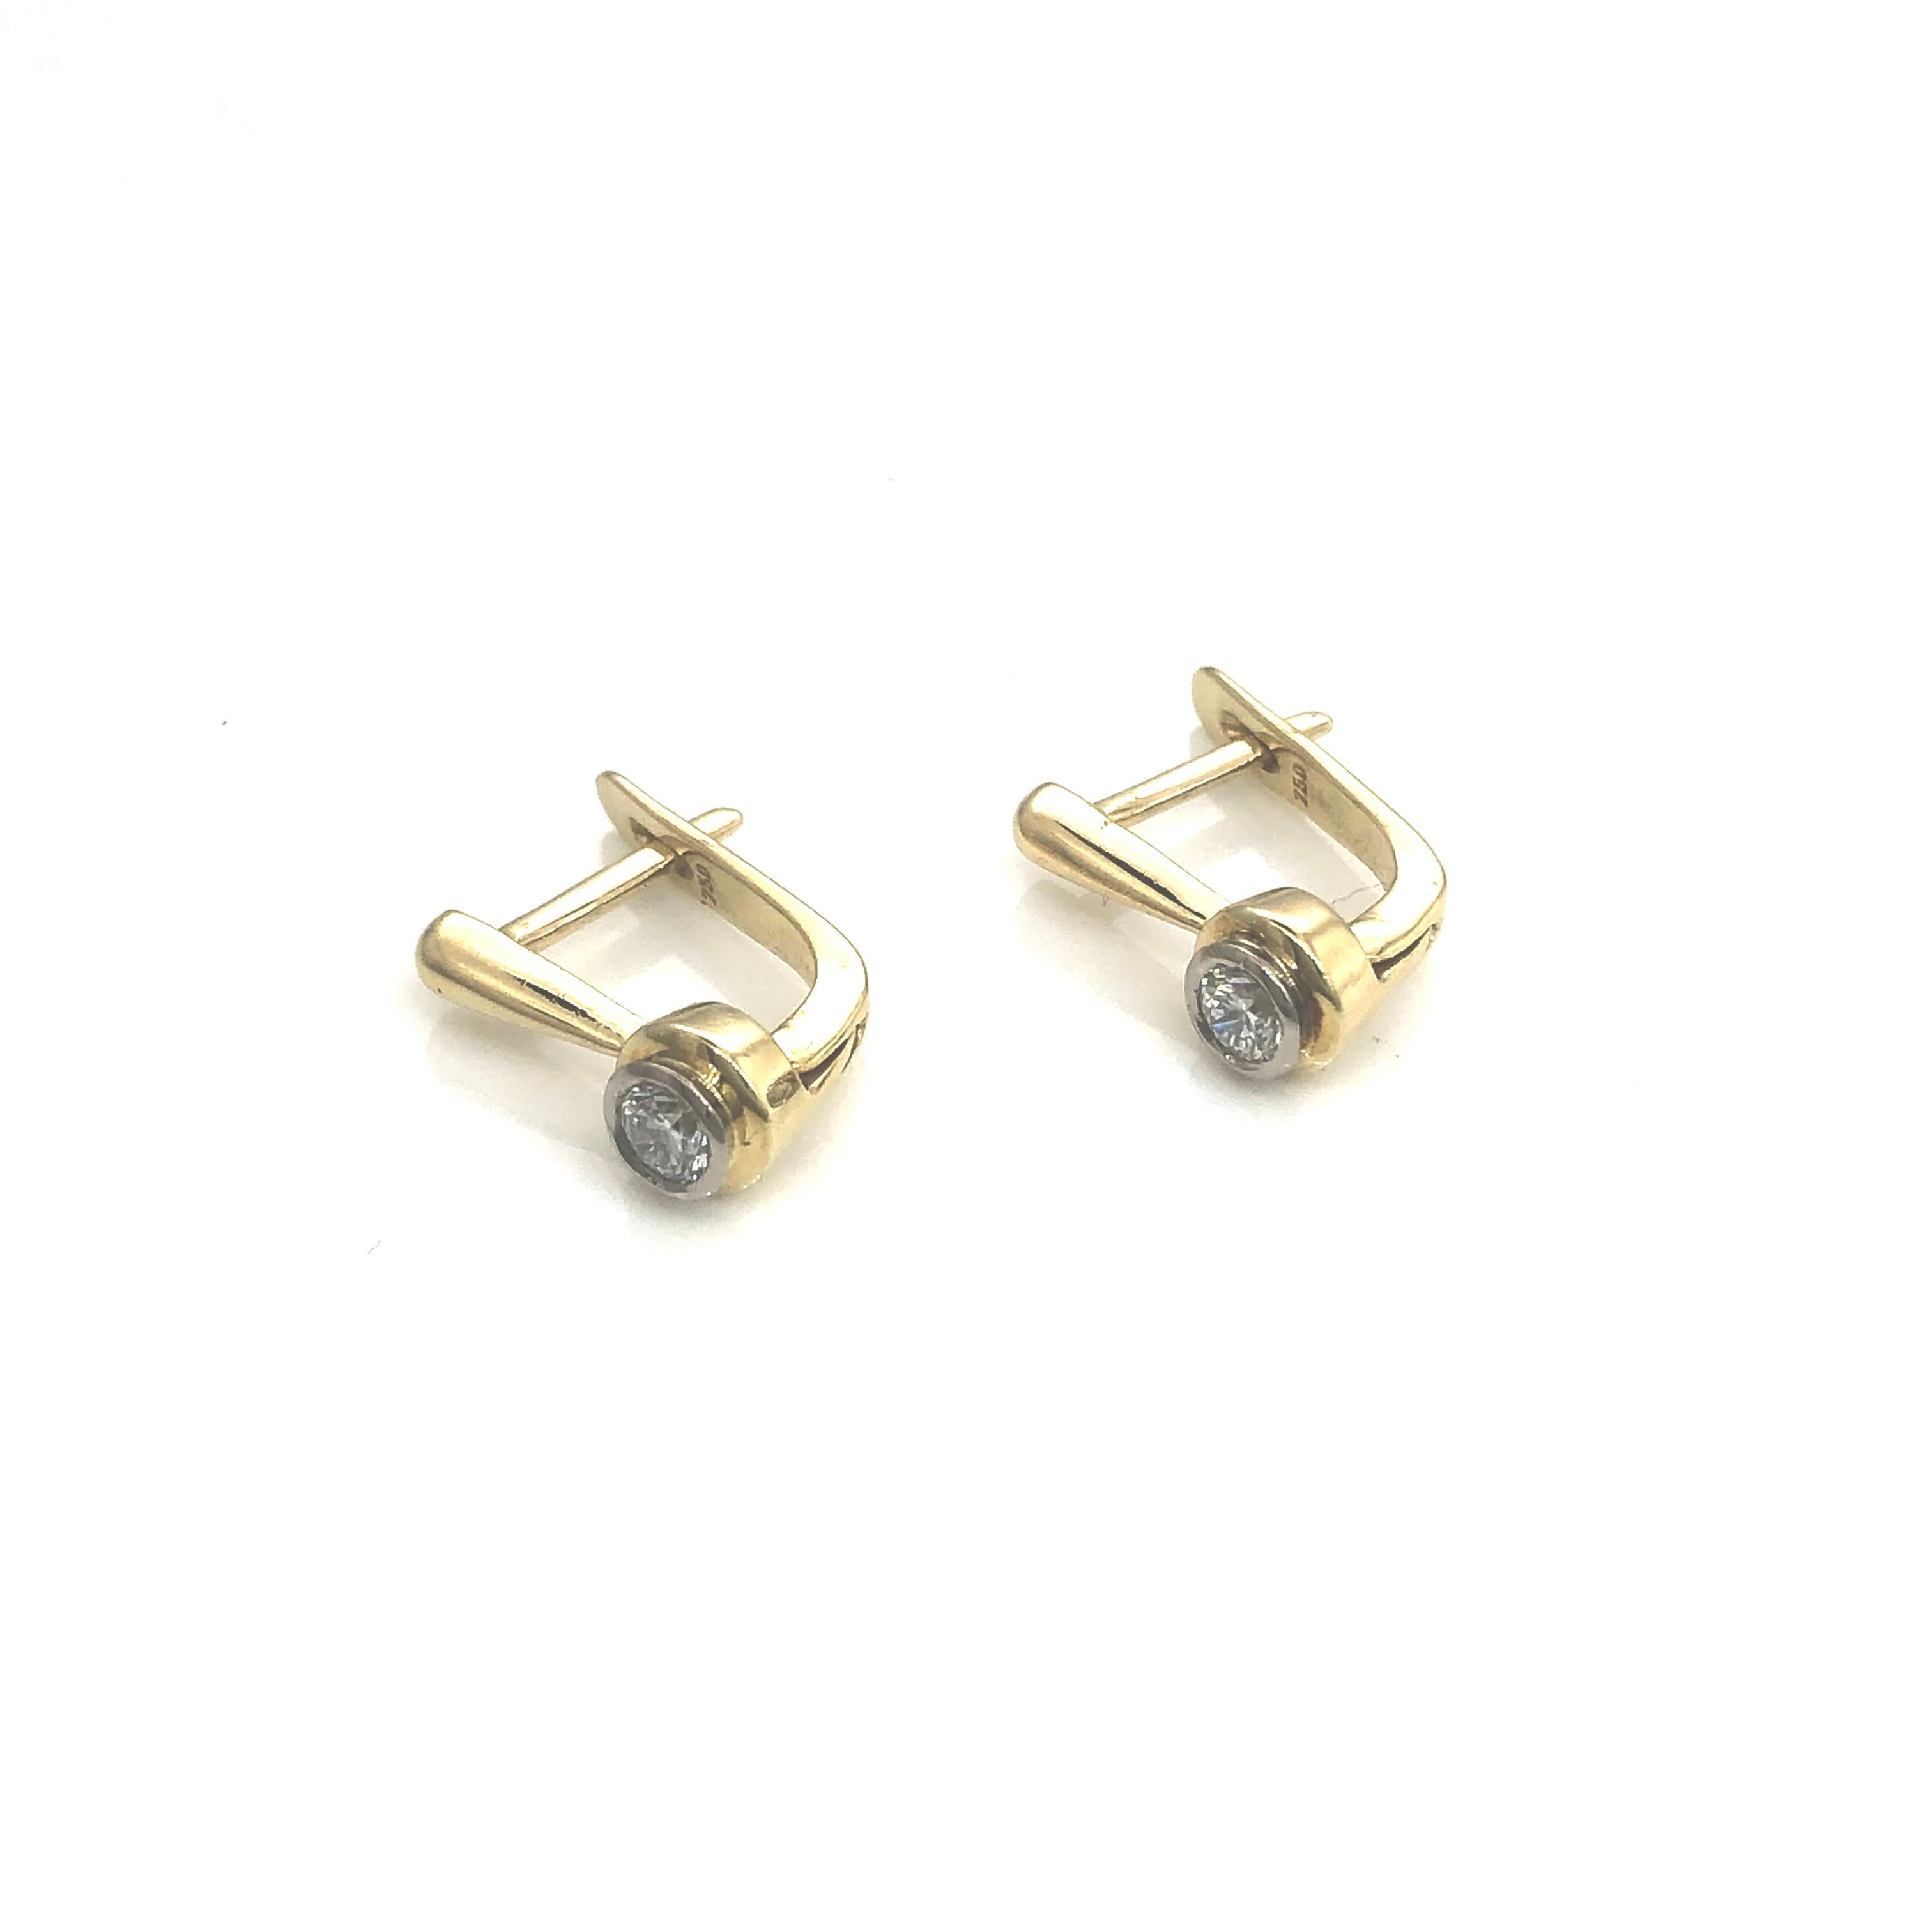 Elegant fully hand made 18 carat yellow gold earrings ,
each set with one round brilliant cut diamond totally weighing 0.30 carats
Classy rub-over setting and very safe Europen snap lock.
Weight of the earrings is 3.3 grams 
Lenth of the earrings is